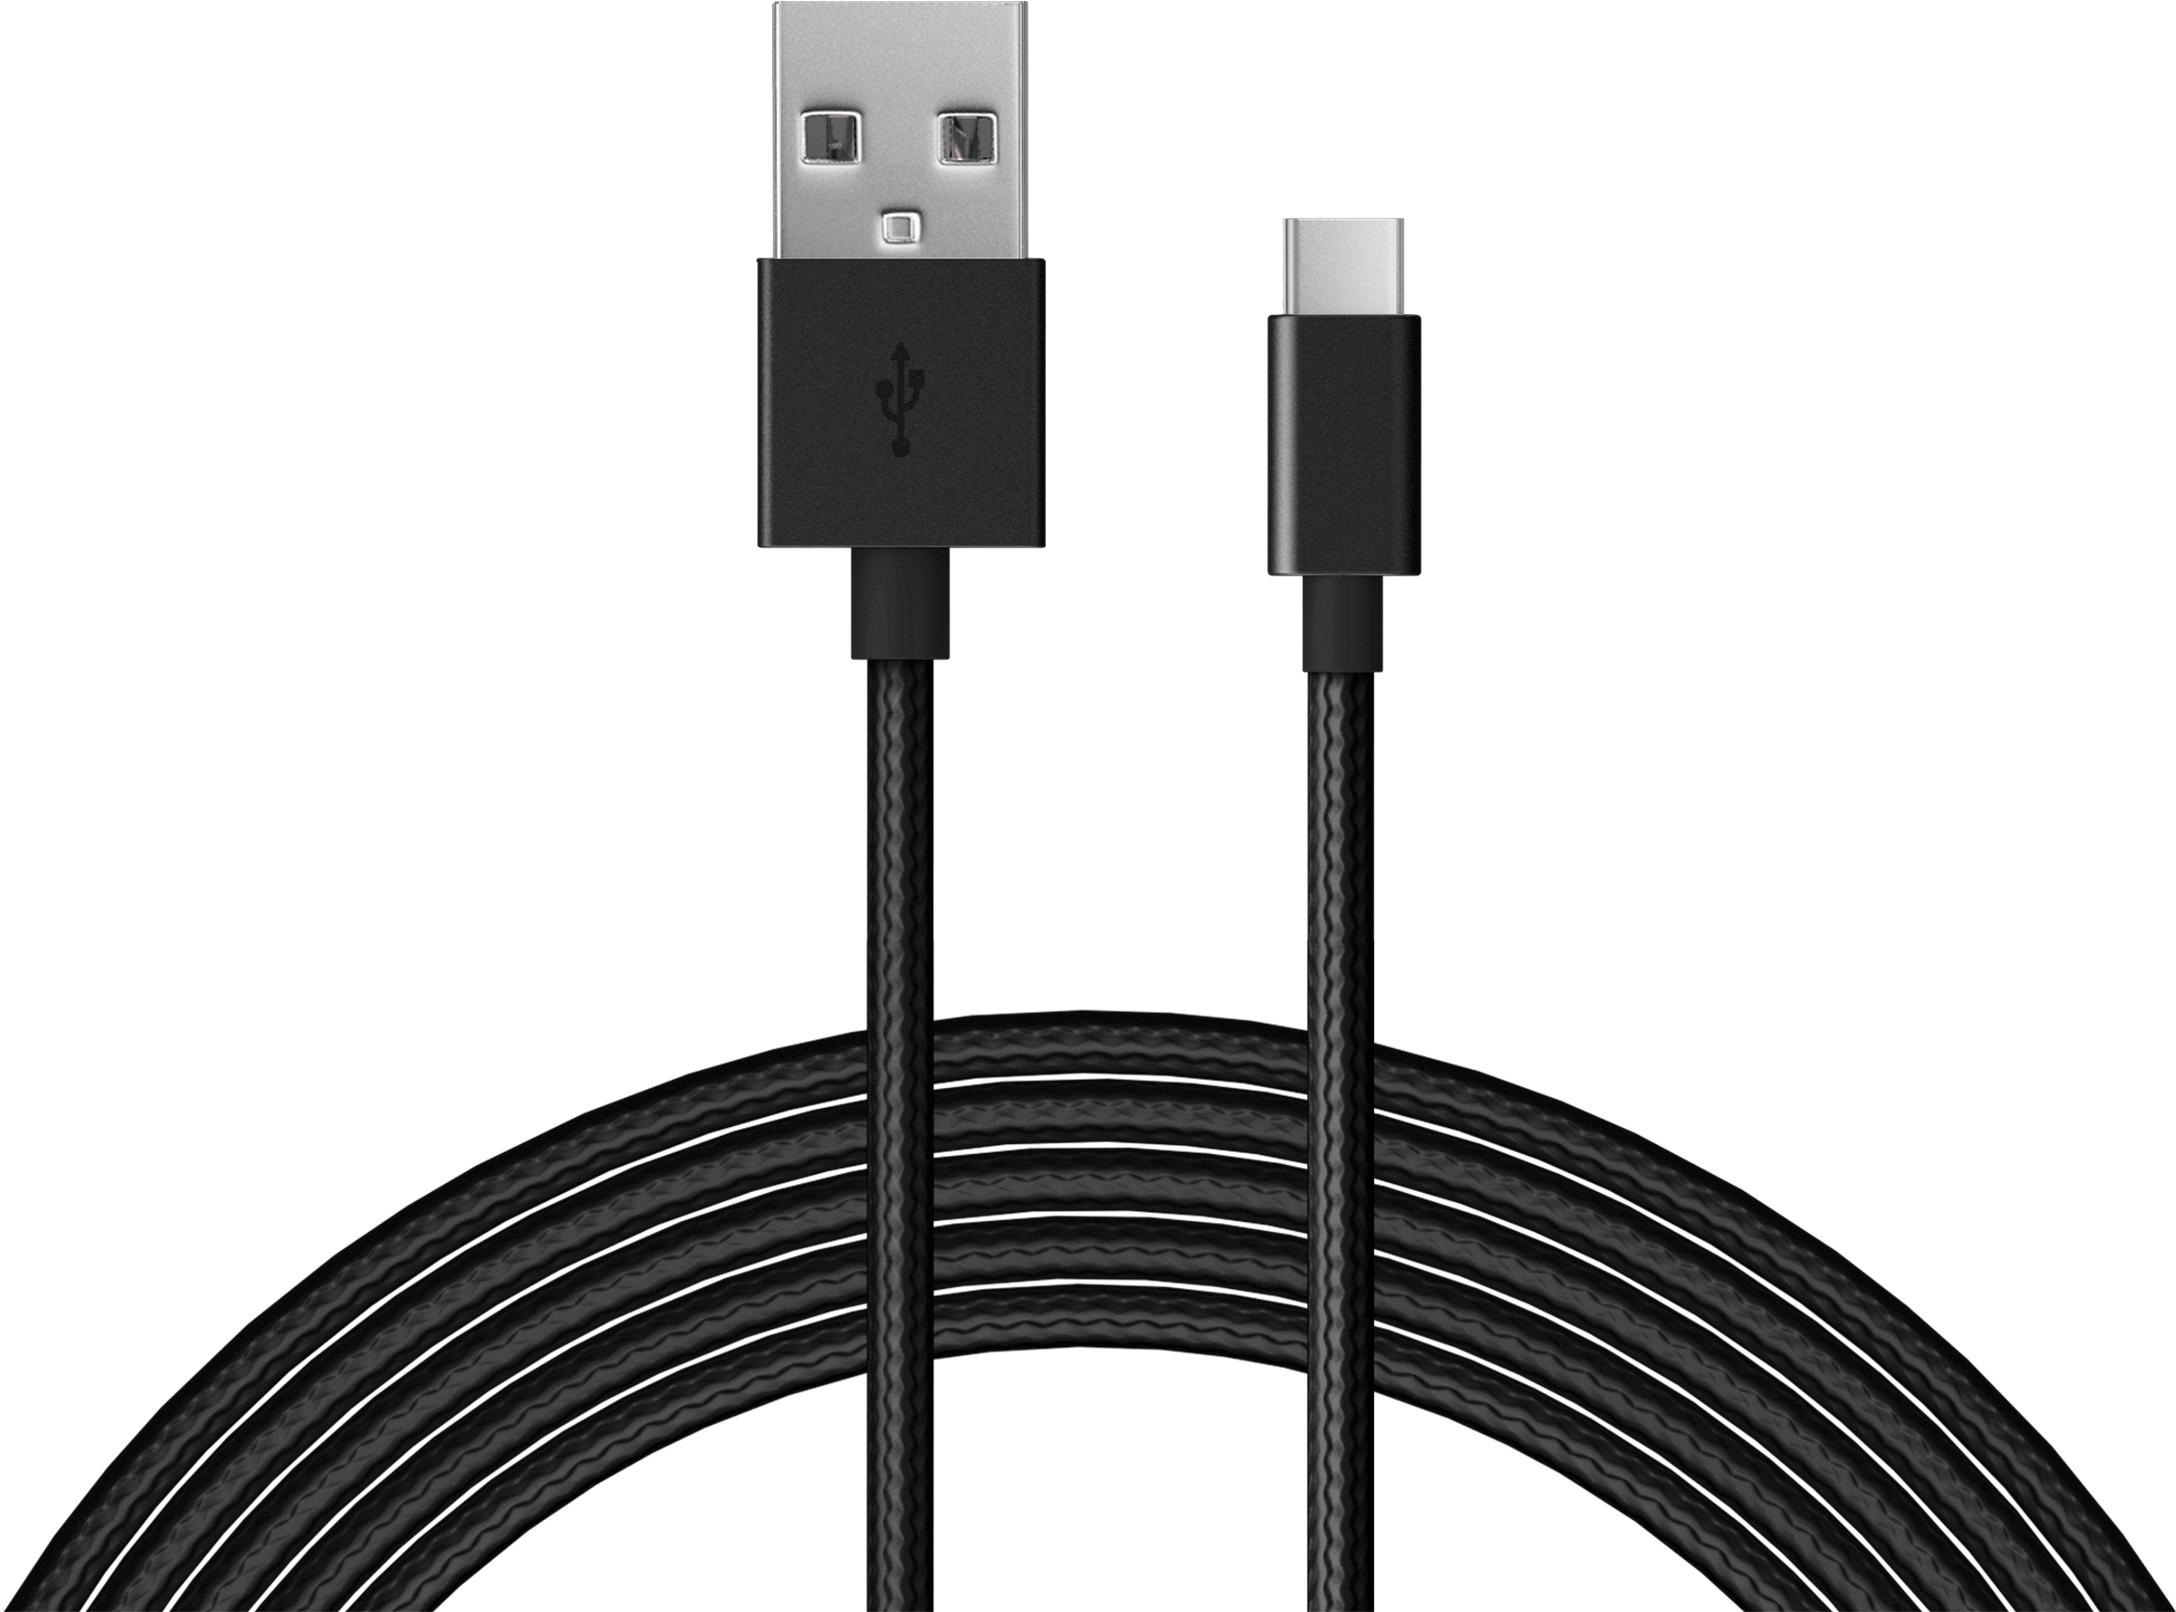 Just Wireless - 6' USB Type C-to-USB Cable - Black was $21.99 now $13.19 (40.0% off)